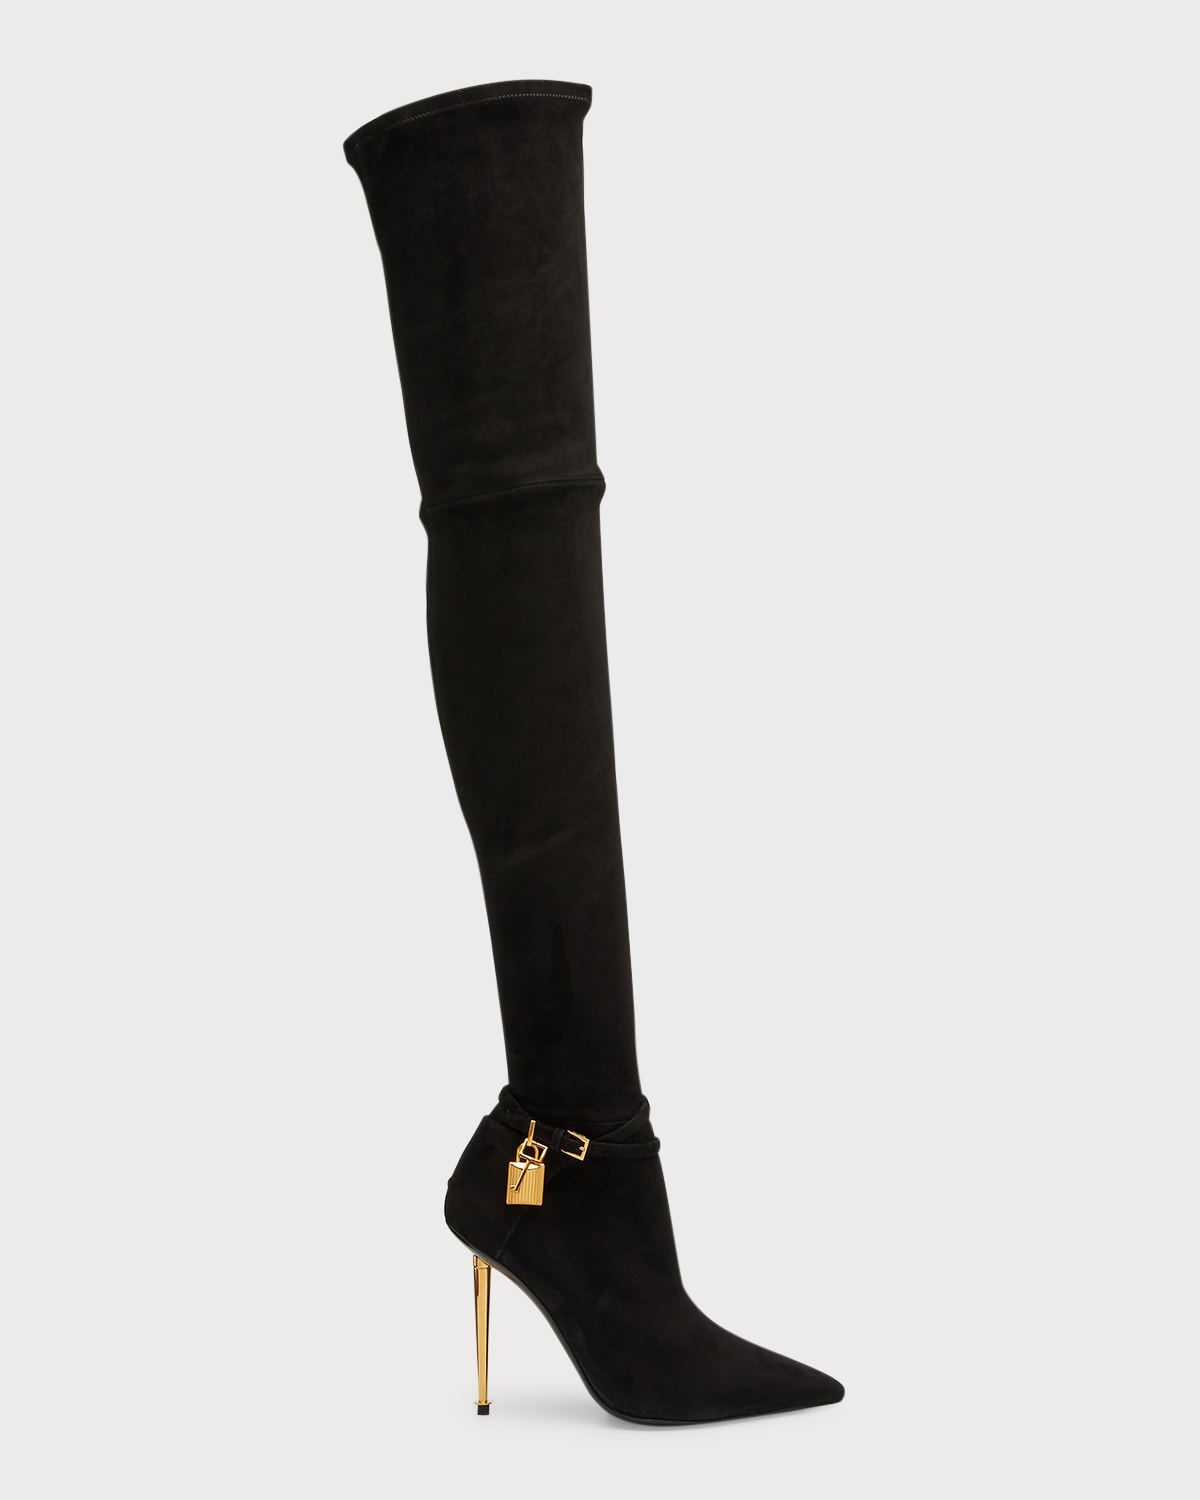 TOM FORD LOCK SUEDE OVER-THE-KNEE BOOTS